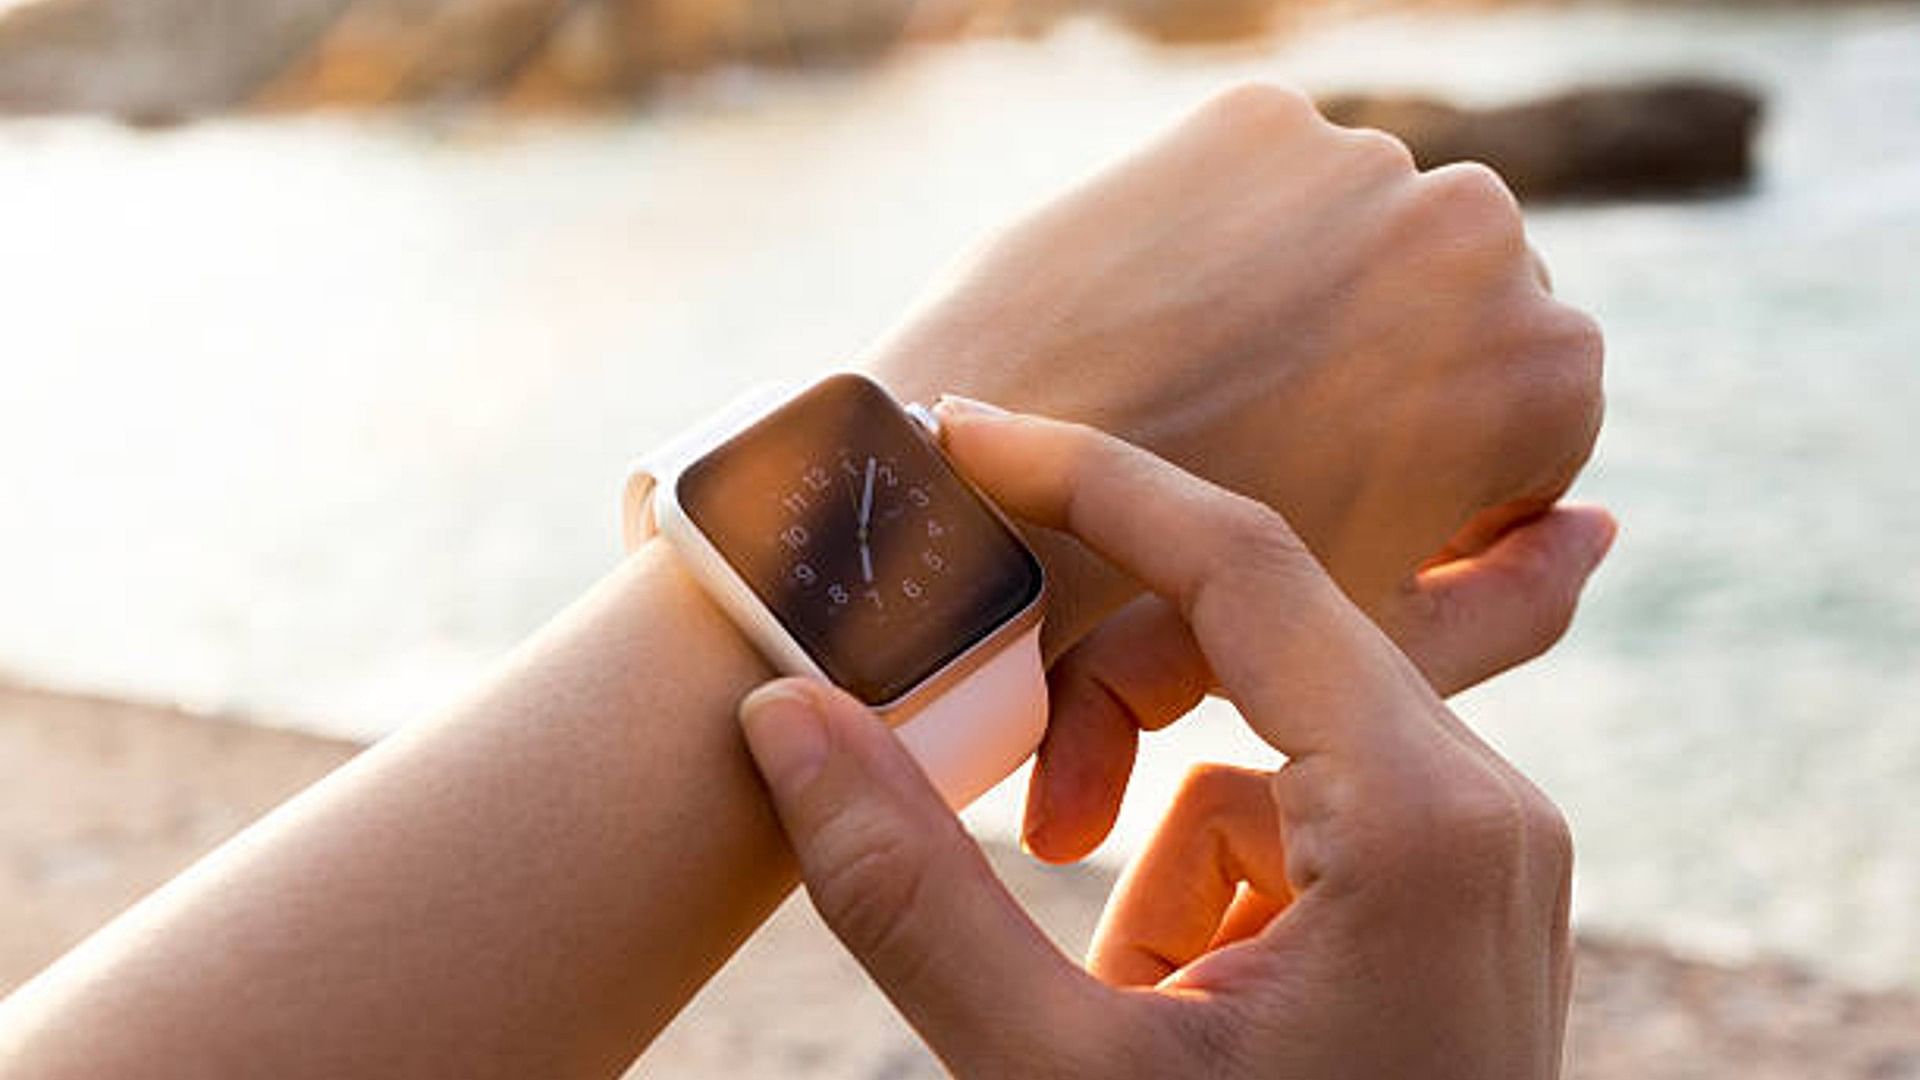 When a man used an apple watch to spy on his girlfriend in America